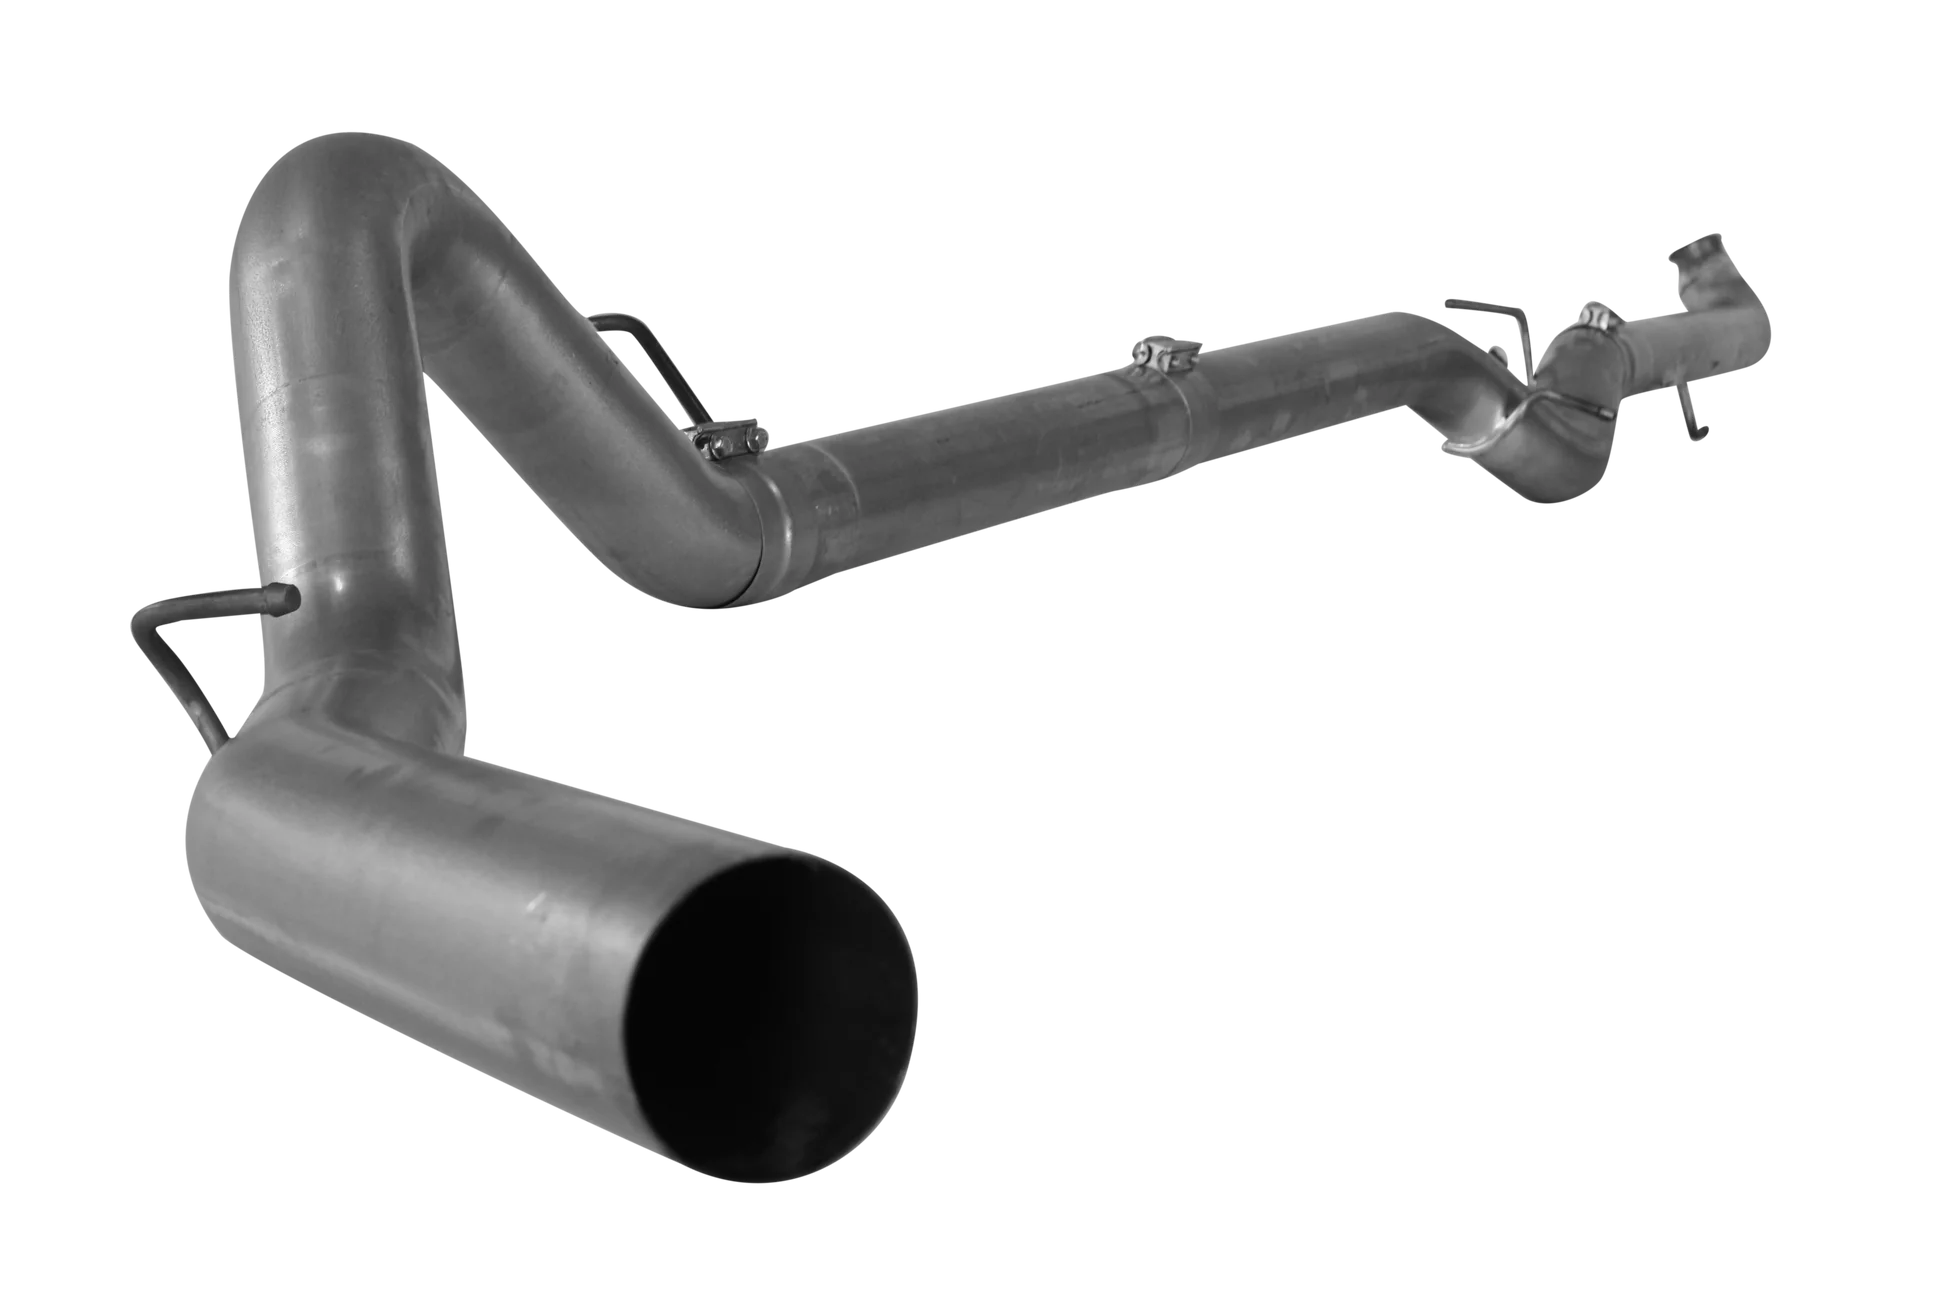 432112 432107 431112 431107 Mel's Manufacturing 4" Downpipe Back Single | 2001-2007 GM 2500/3500 6.6L DURAMAX Mels Mfg FloPro Flo-Pro Flo Pro Hell On Wheels Performance Ltd Limited Canadian Owned and Operated Online Diesel Parts Distribution & Wholesale Supply Center in Alberta Canada Shipping Supplying to Alberta British Columbia Sask Saskatchewan Manitoba Ontario Quebec Newfoundland Labrador New Brunswick Nova Scotia Prince Edward Island AB BC SK MB ON QC PQ NS NB NFLD N.L. PEI